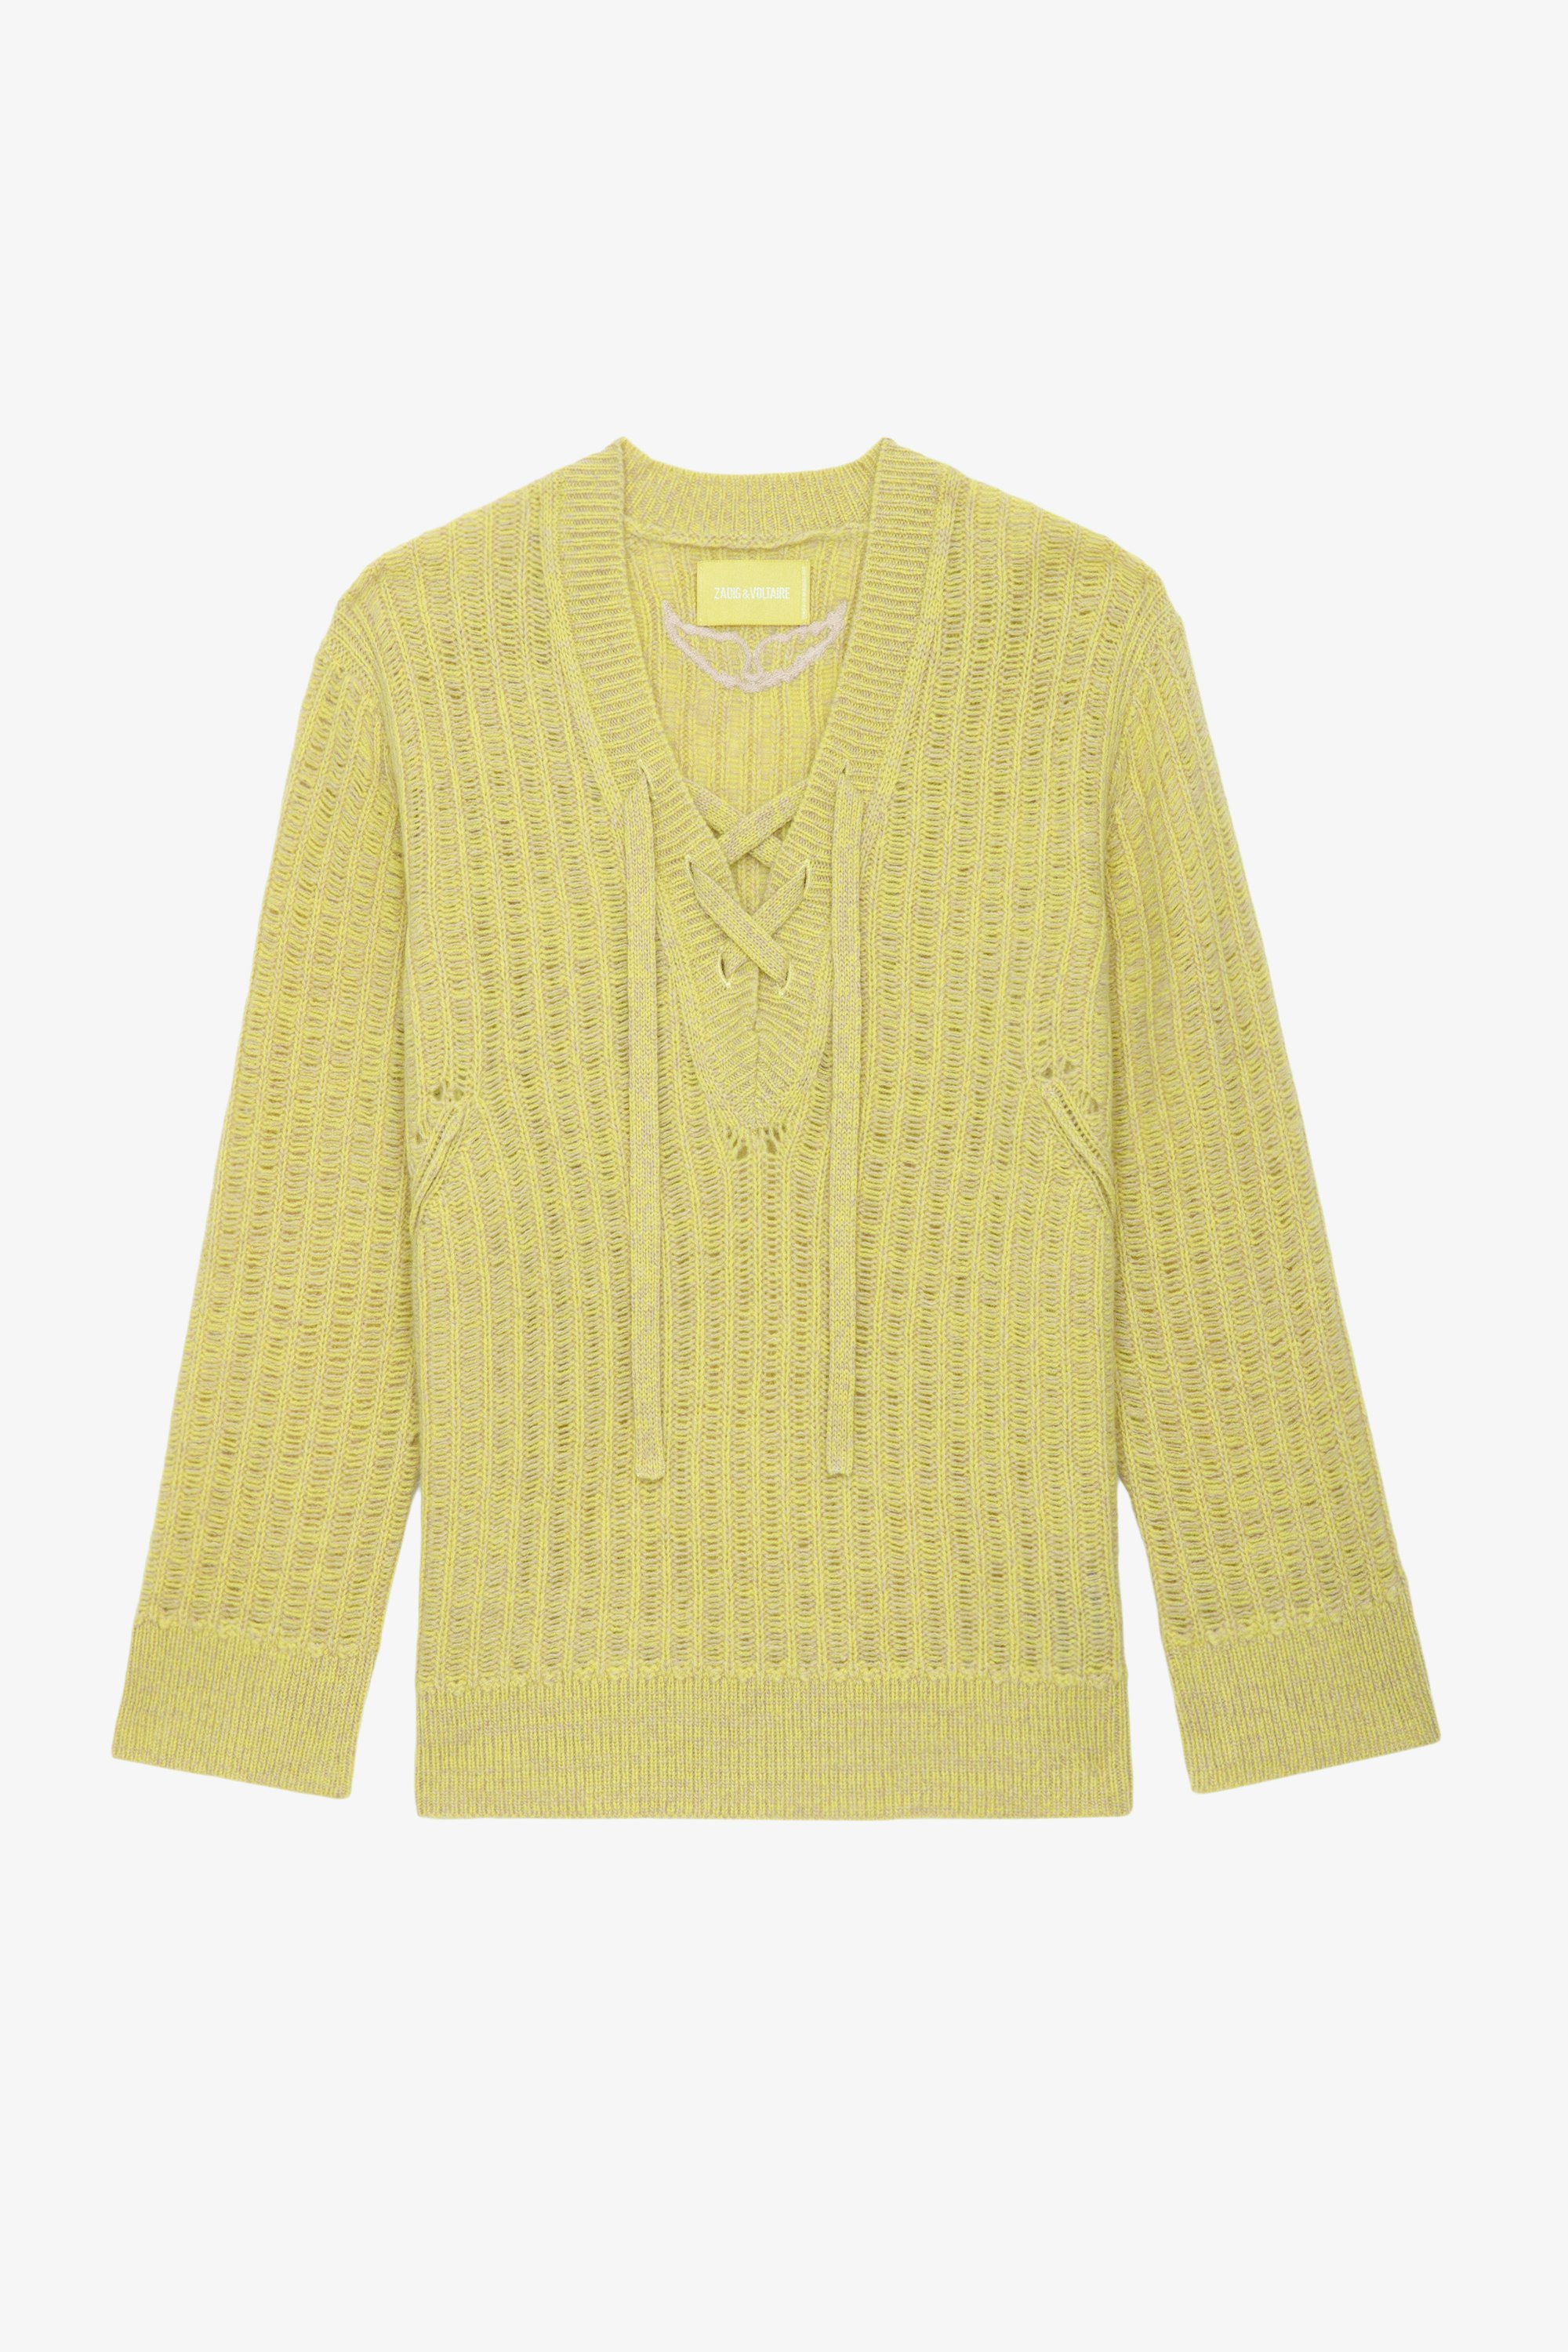 Fanny Jumper - Light yellow merino wool jumper with openwork details, long sleeves and drawstring ties.